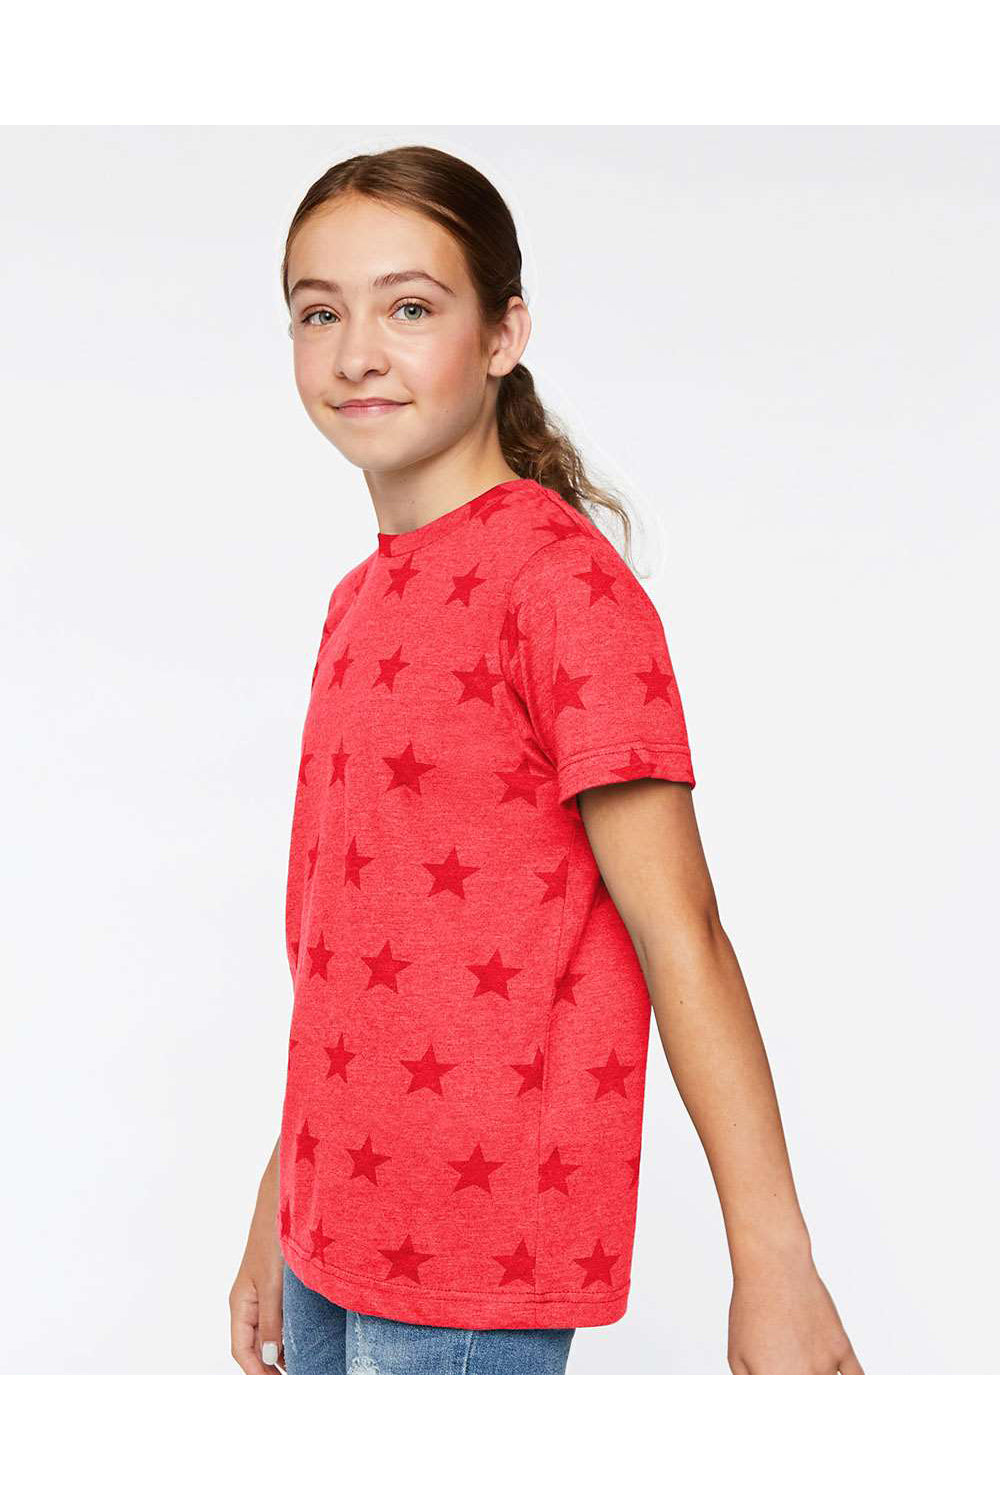 Code Five 2229 Youth Star Print Short Sleeve Crewneck T-Shirt Red Model Side